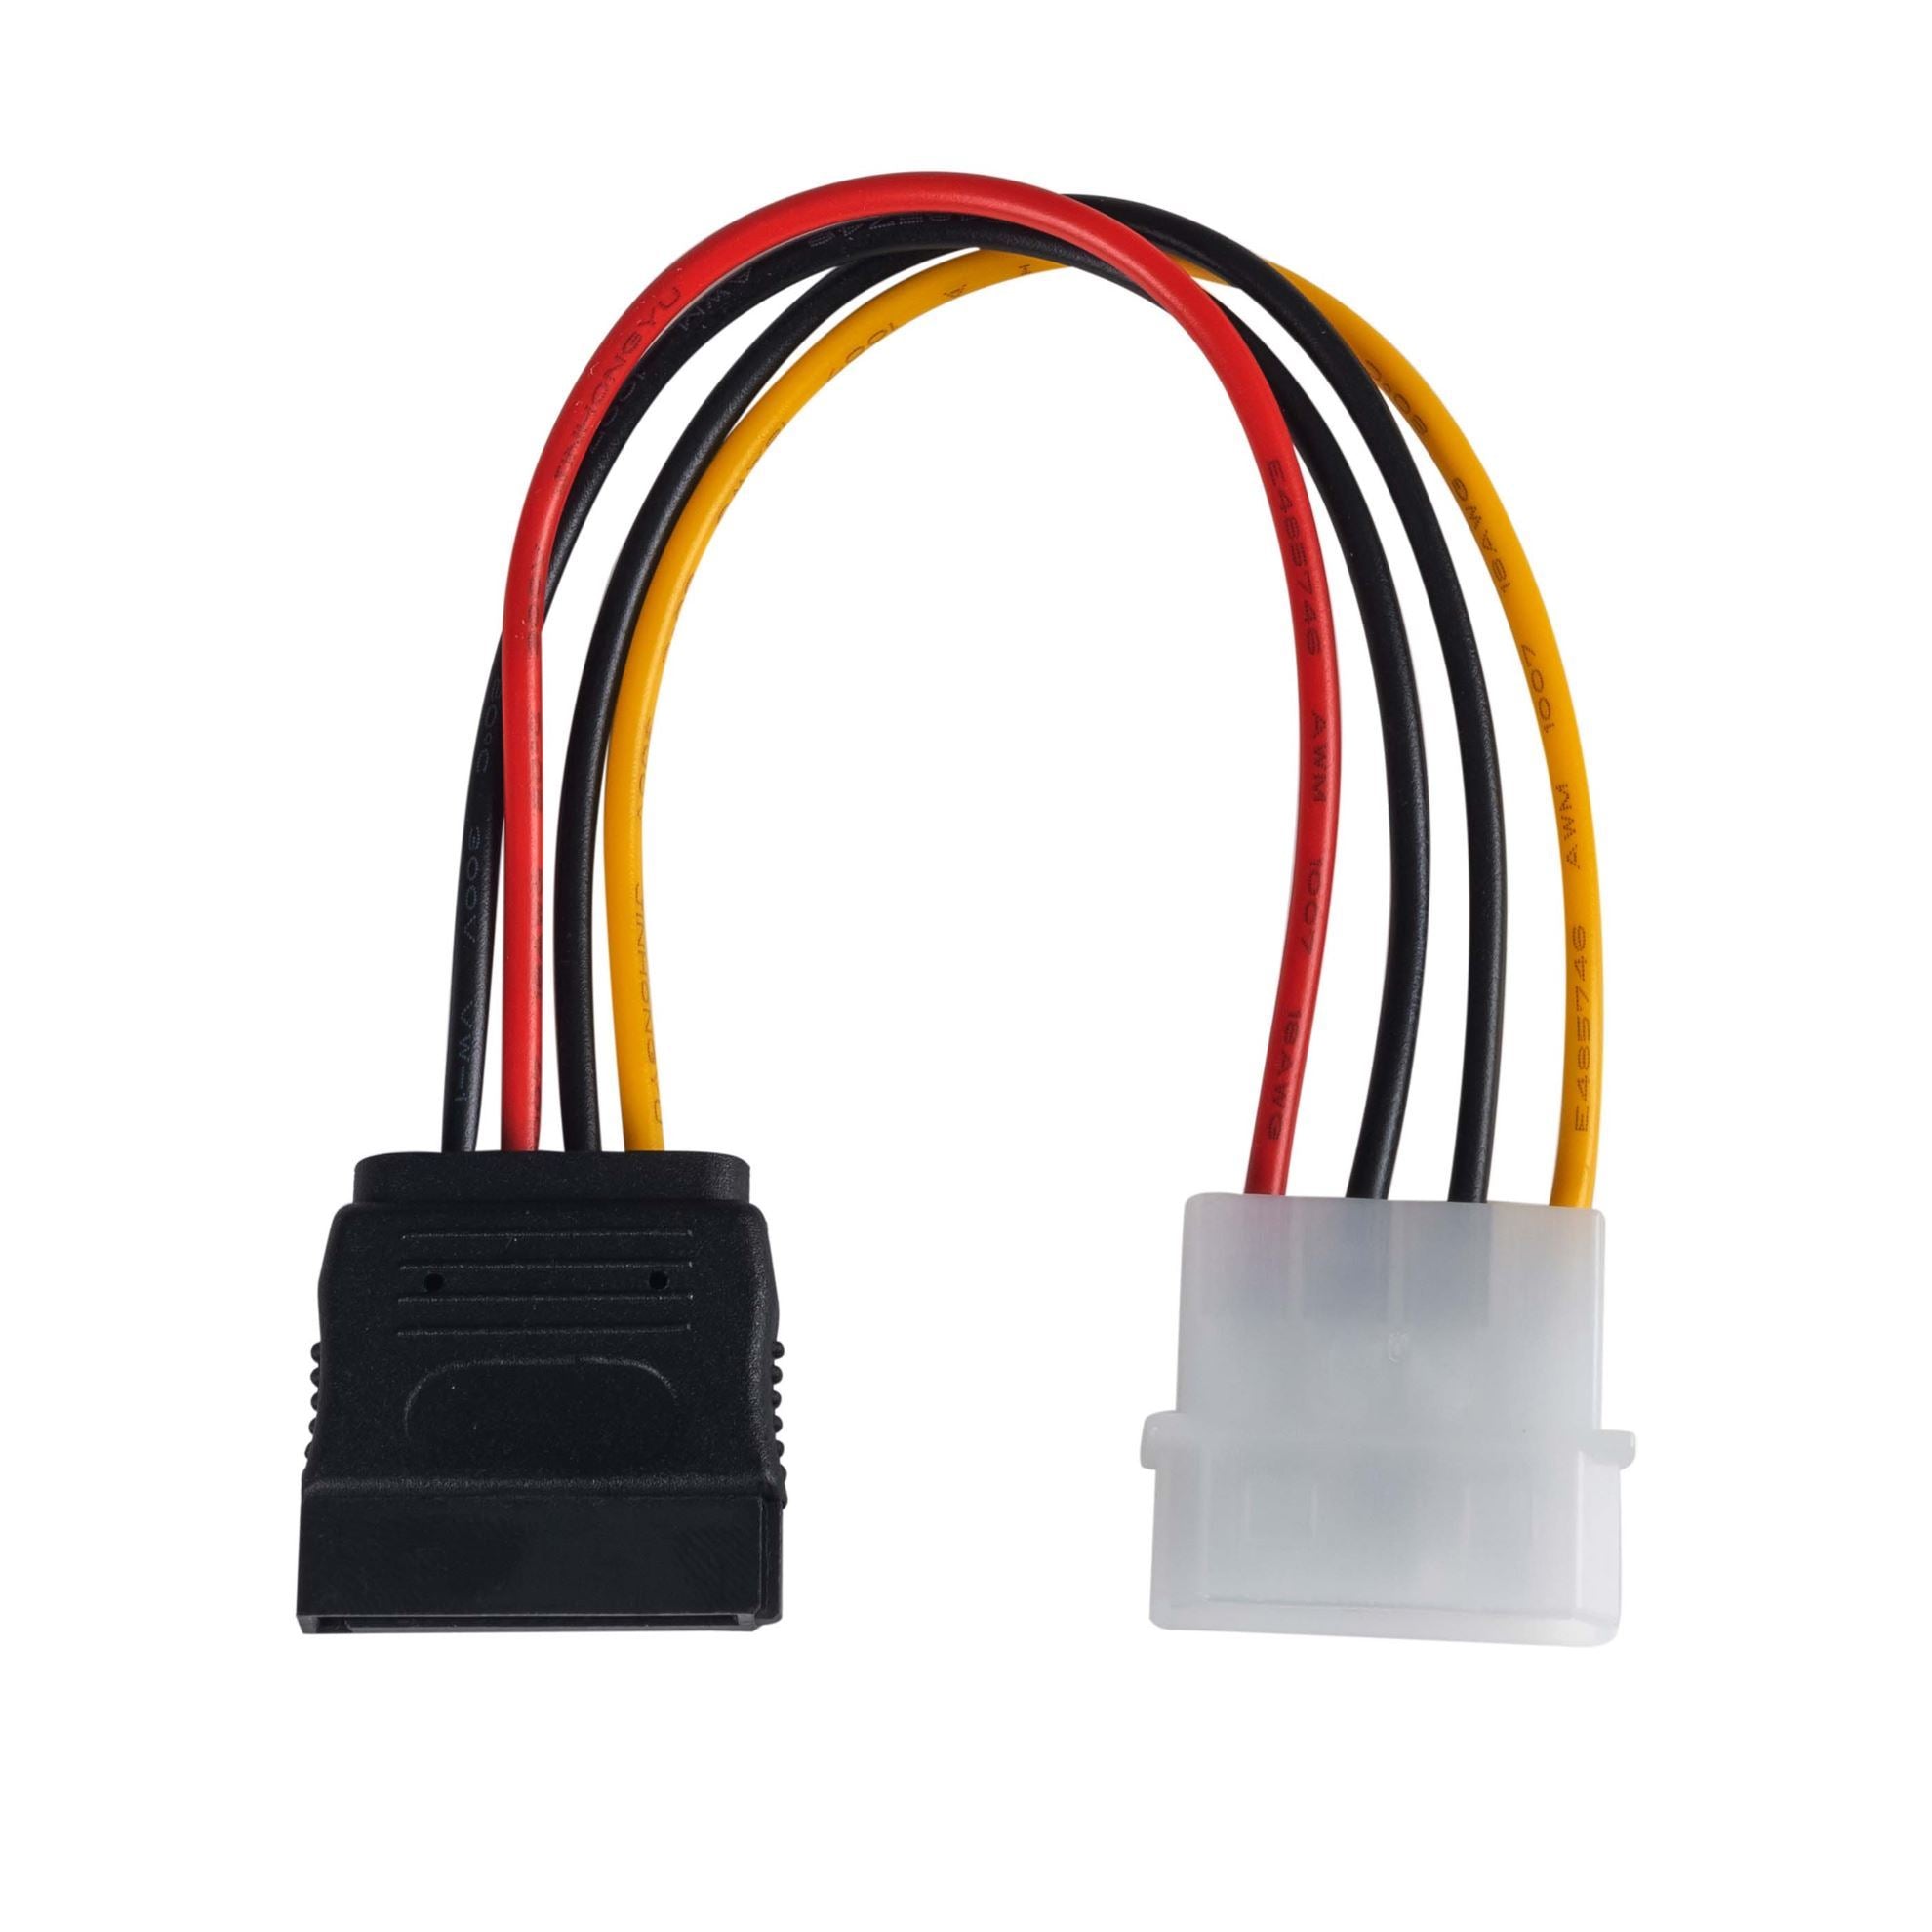 DYNAMIX_0.17m_Serial_ATA_Power_Cable_-_Converts_a_standard_5.25_power_connector_to_serial_ATA_interface 1031